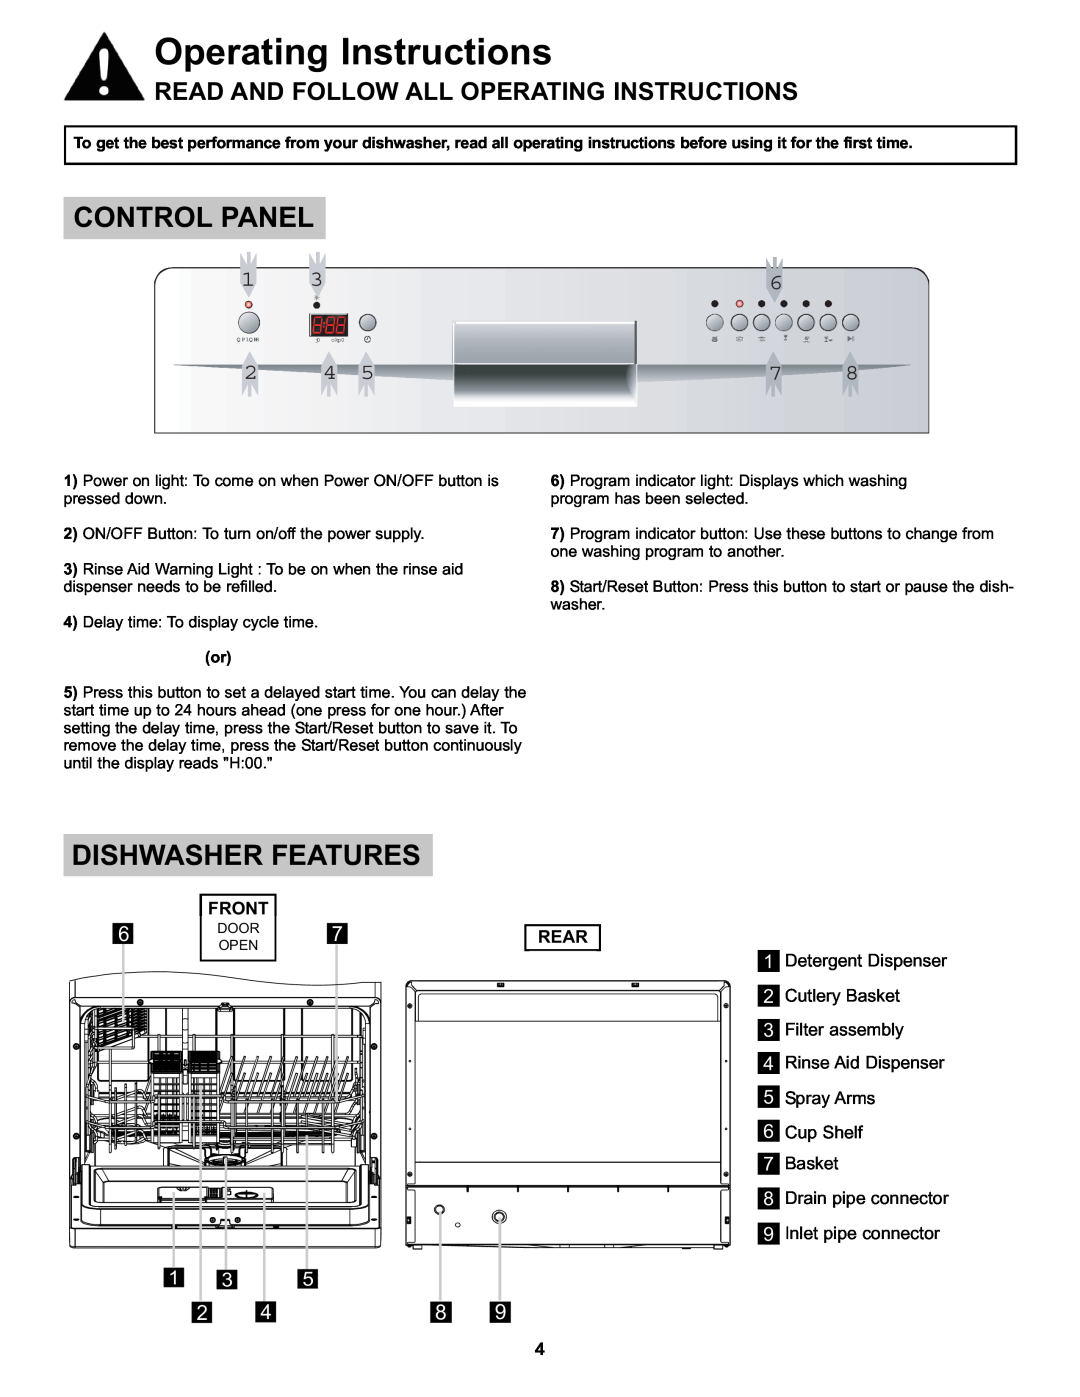 Danby DDW611WLED manual Control Panel, Dishwasher Features, Read And Follow All Operating Instructions 